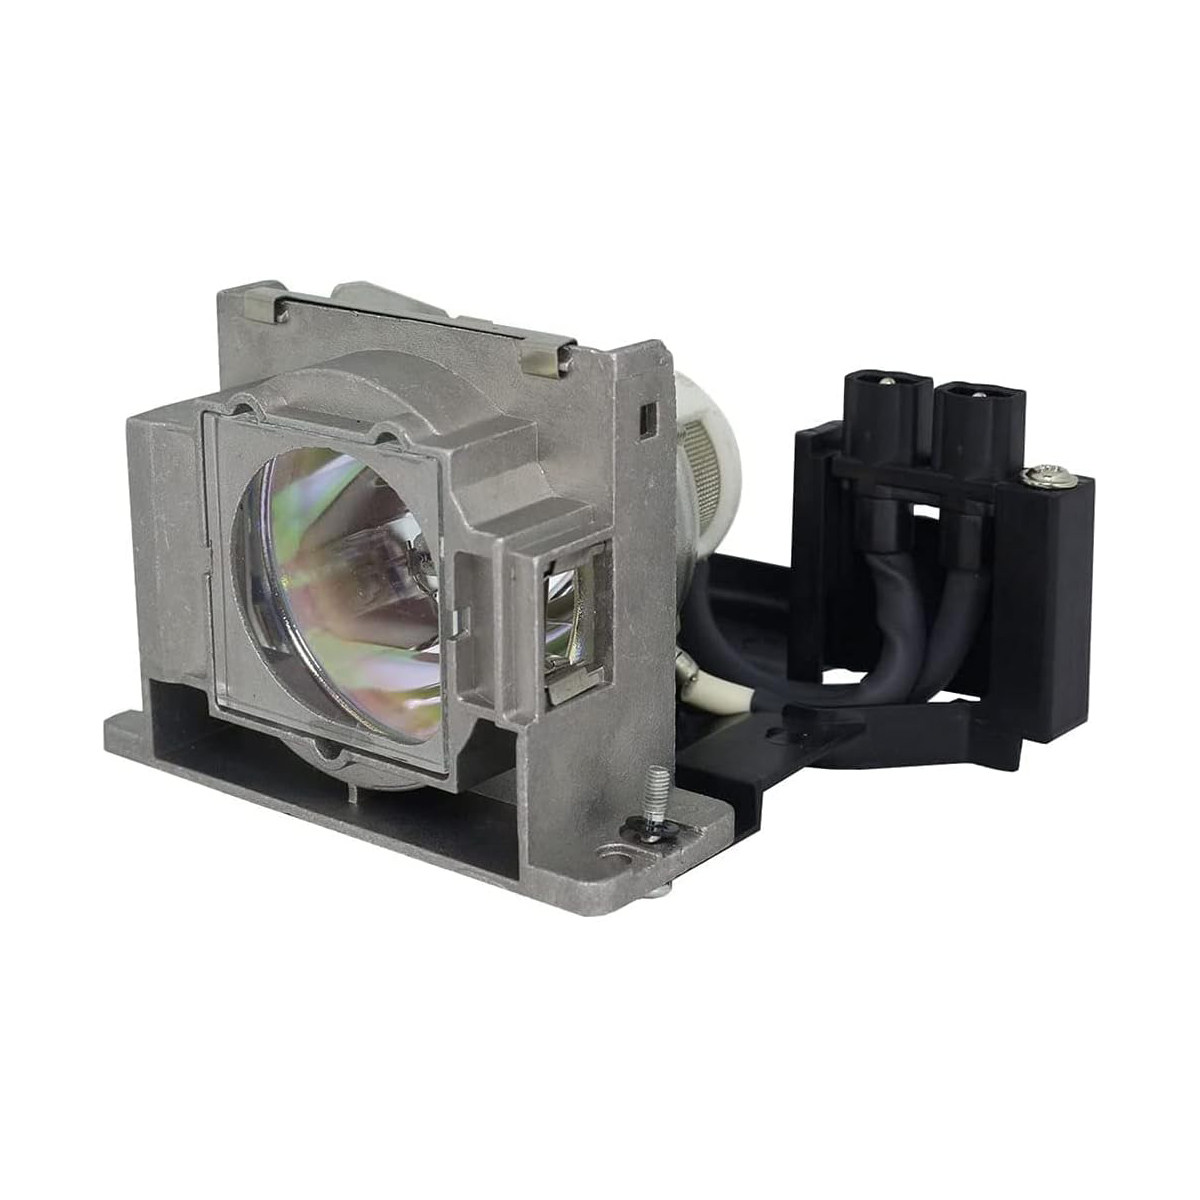 Replacement Projector lamp PJL-625 For YAMAHA DPX-530